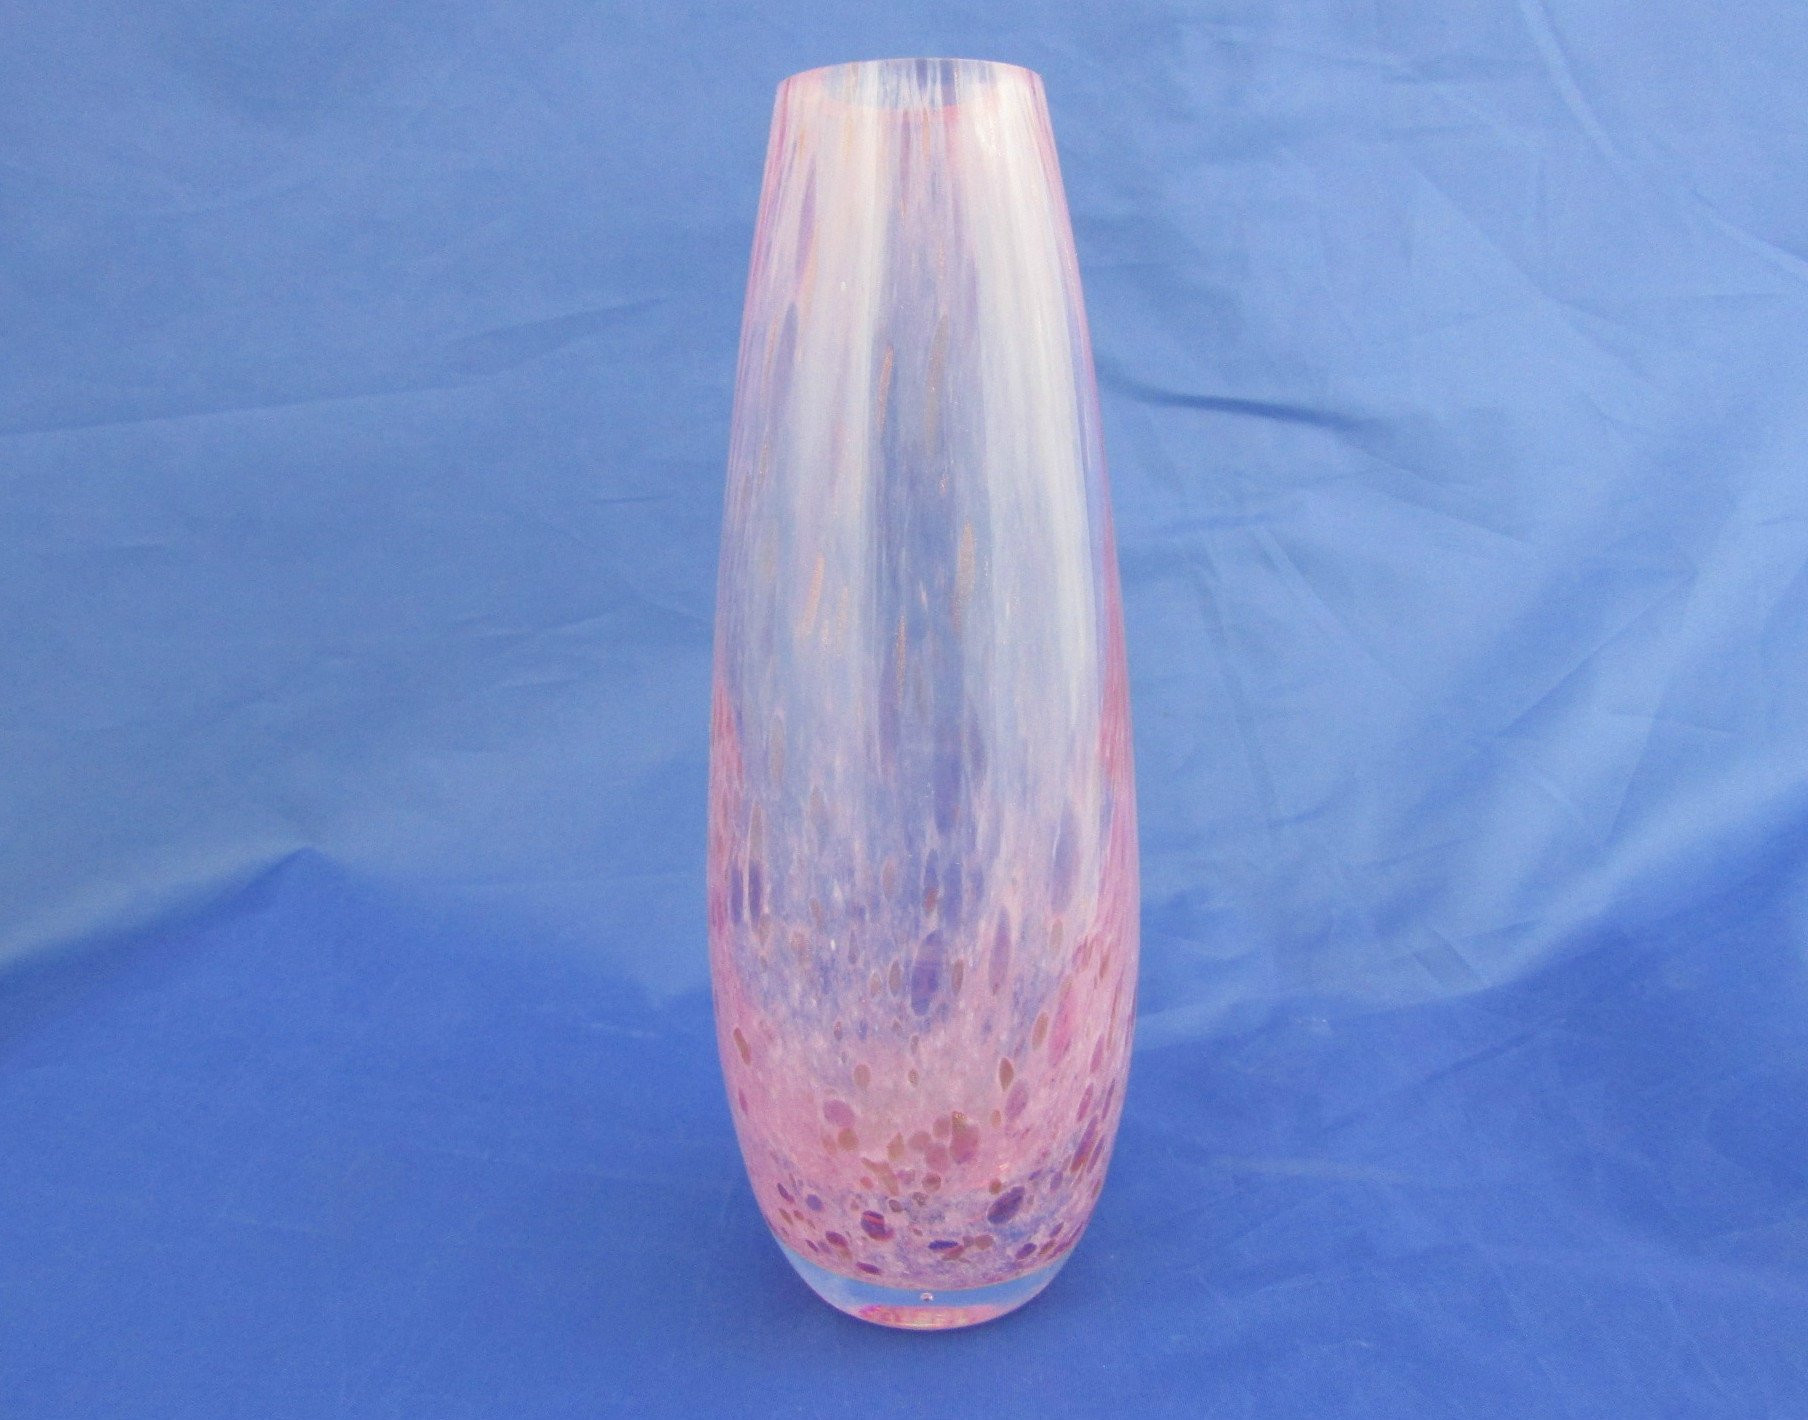 20 Amazing Etched Glass Bud Vase 2024 free download etched glass bud vase of caithness glass vase teardrop shaped vase pink spatter glass etsy with dc29fc294c28ezoom